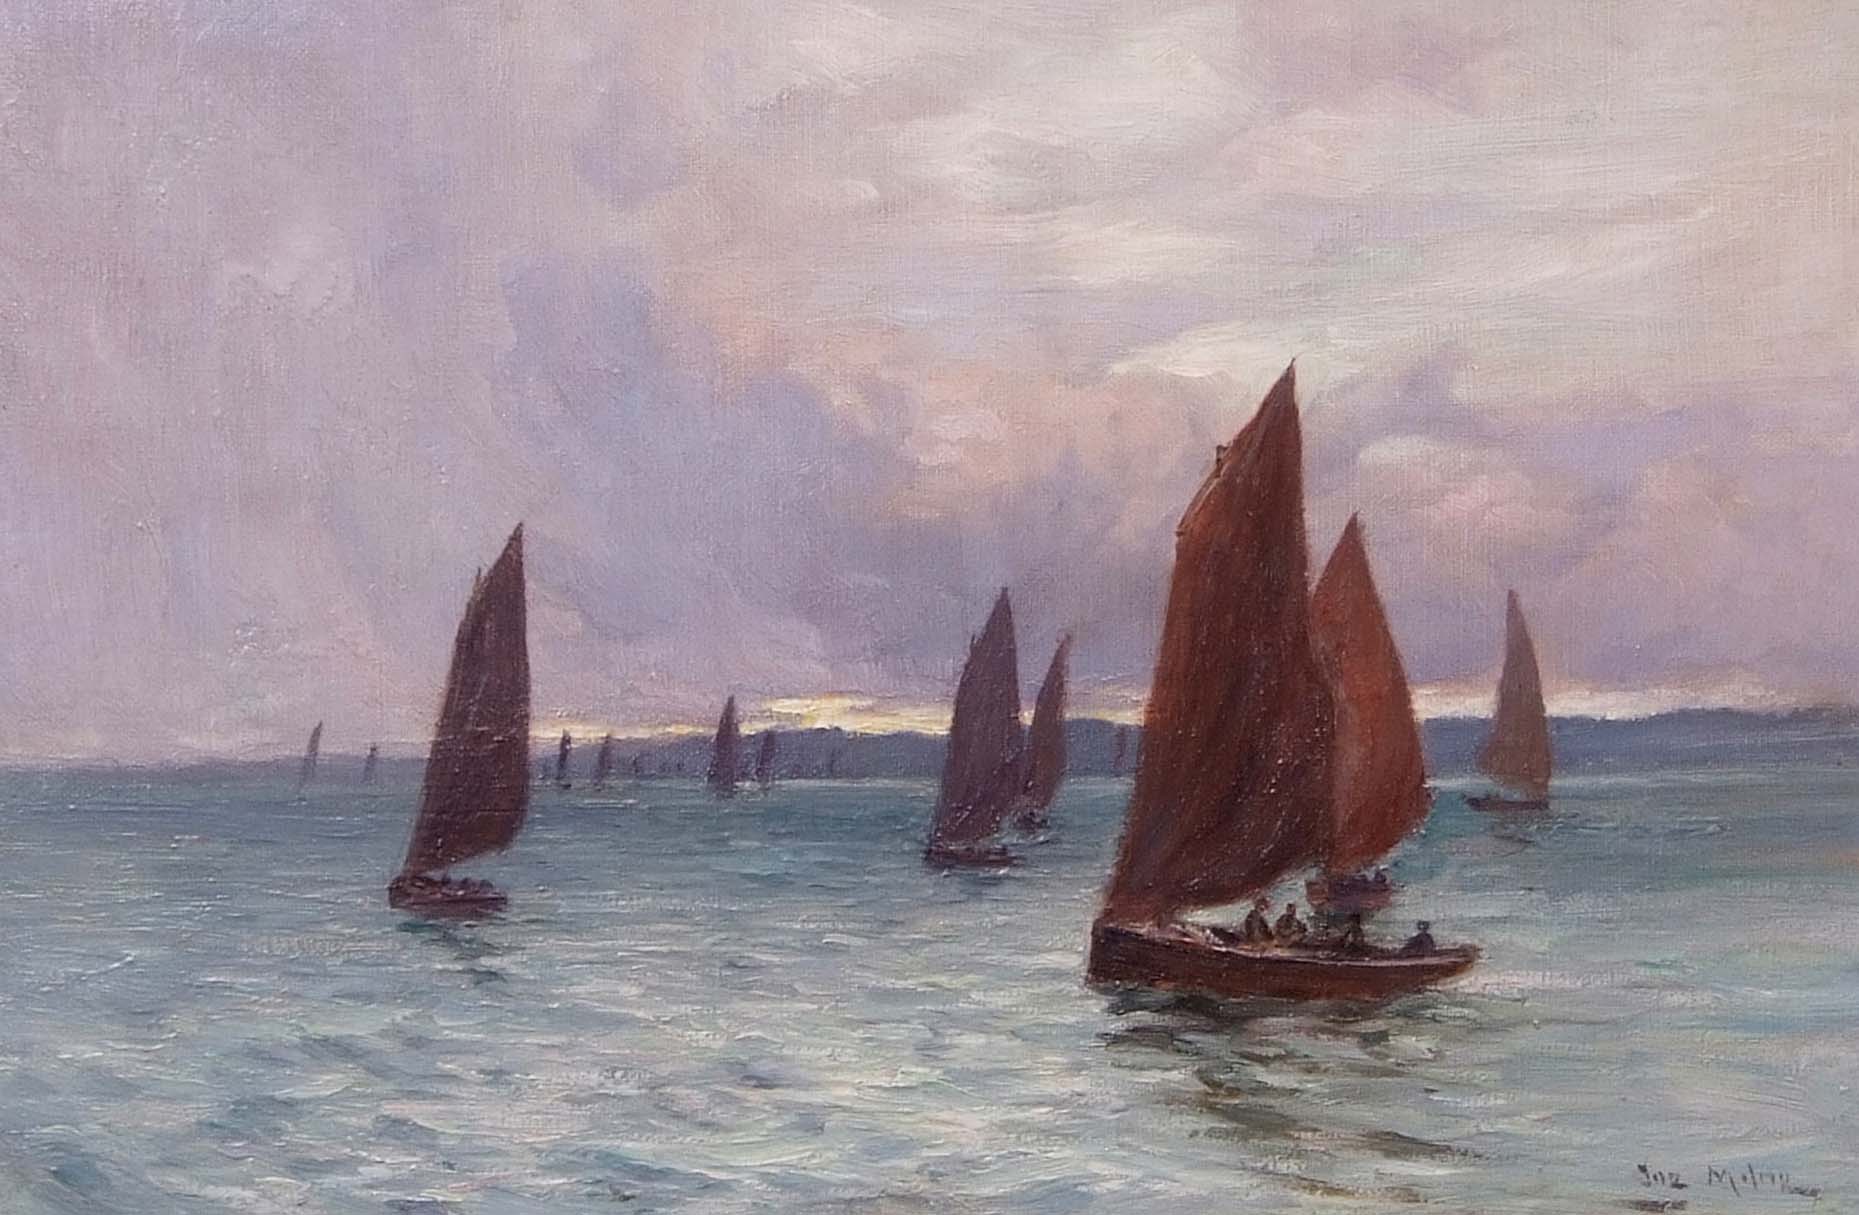 Joseph Milne (1857-1911) "Boats on the Silvery Tay", oil on canvas, signed lower right, 30 x 45cm